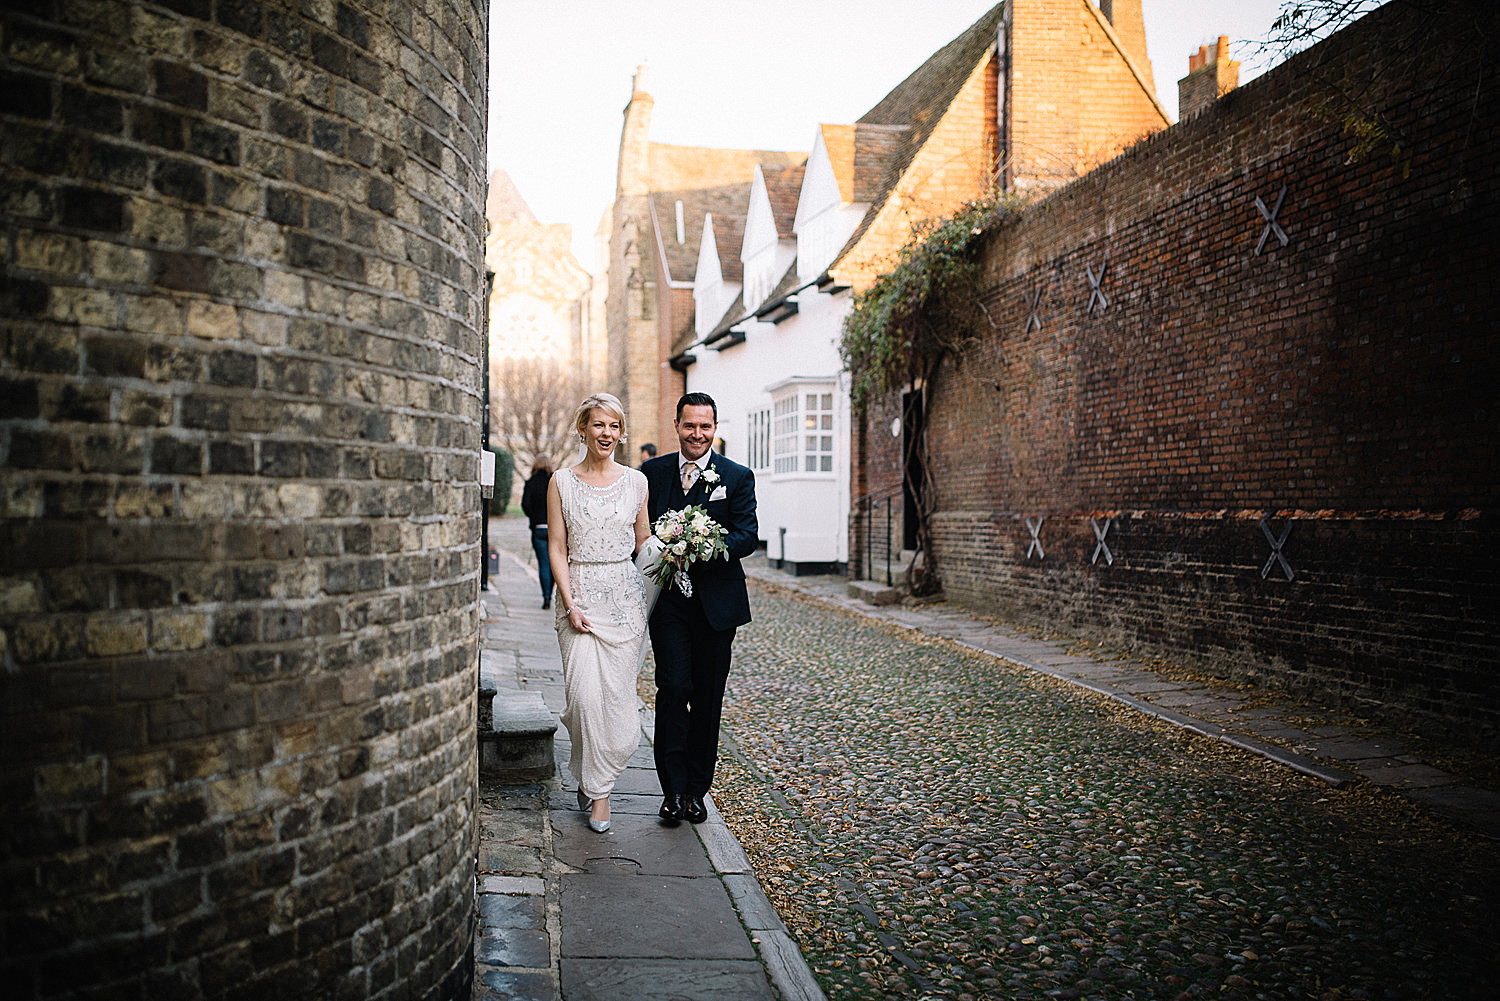 Bride and Groom walking the streets of Rye